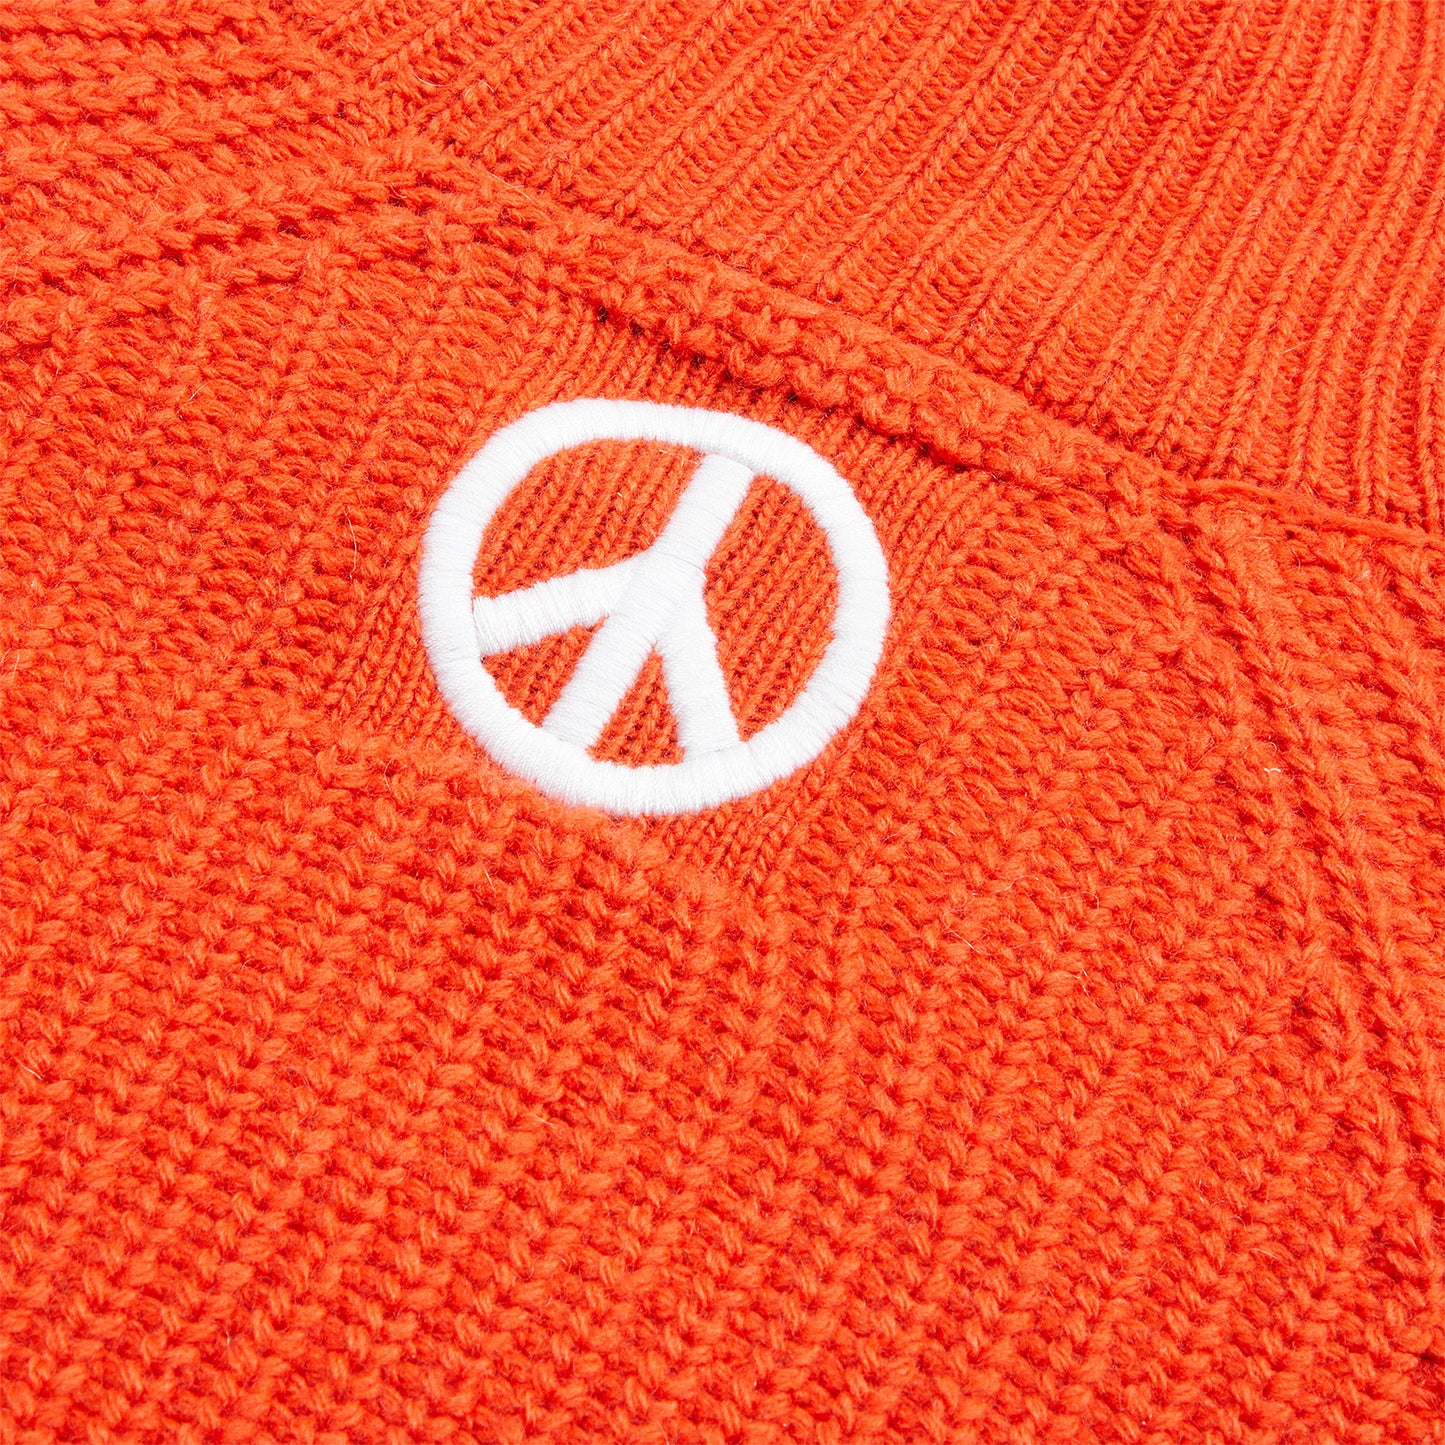 Moschino Peace Embroidered Cropped Turtleneck Sweater (Orange Multi)